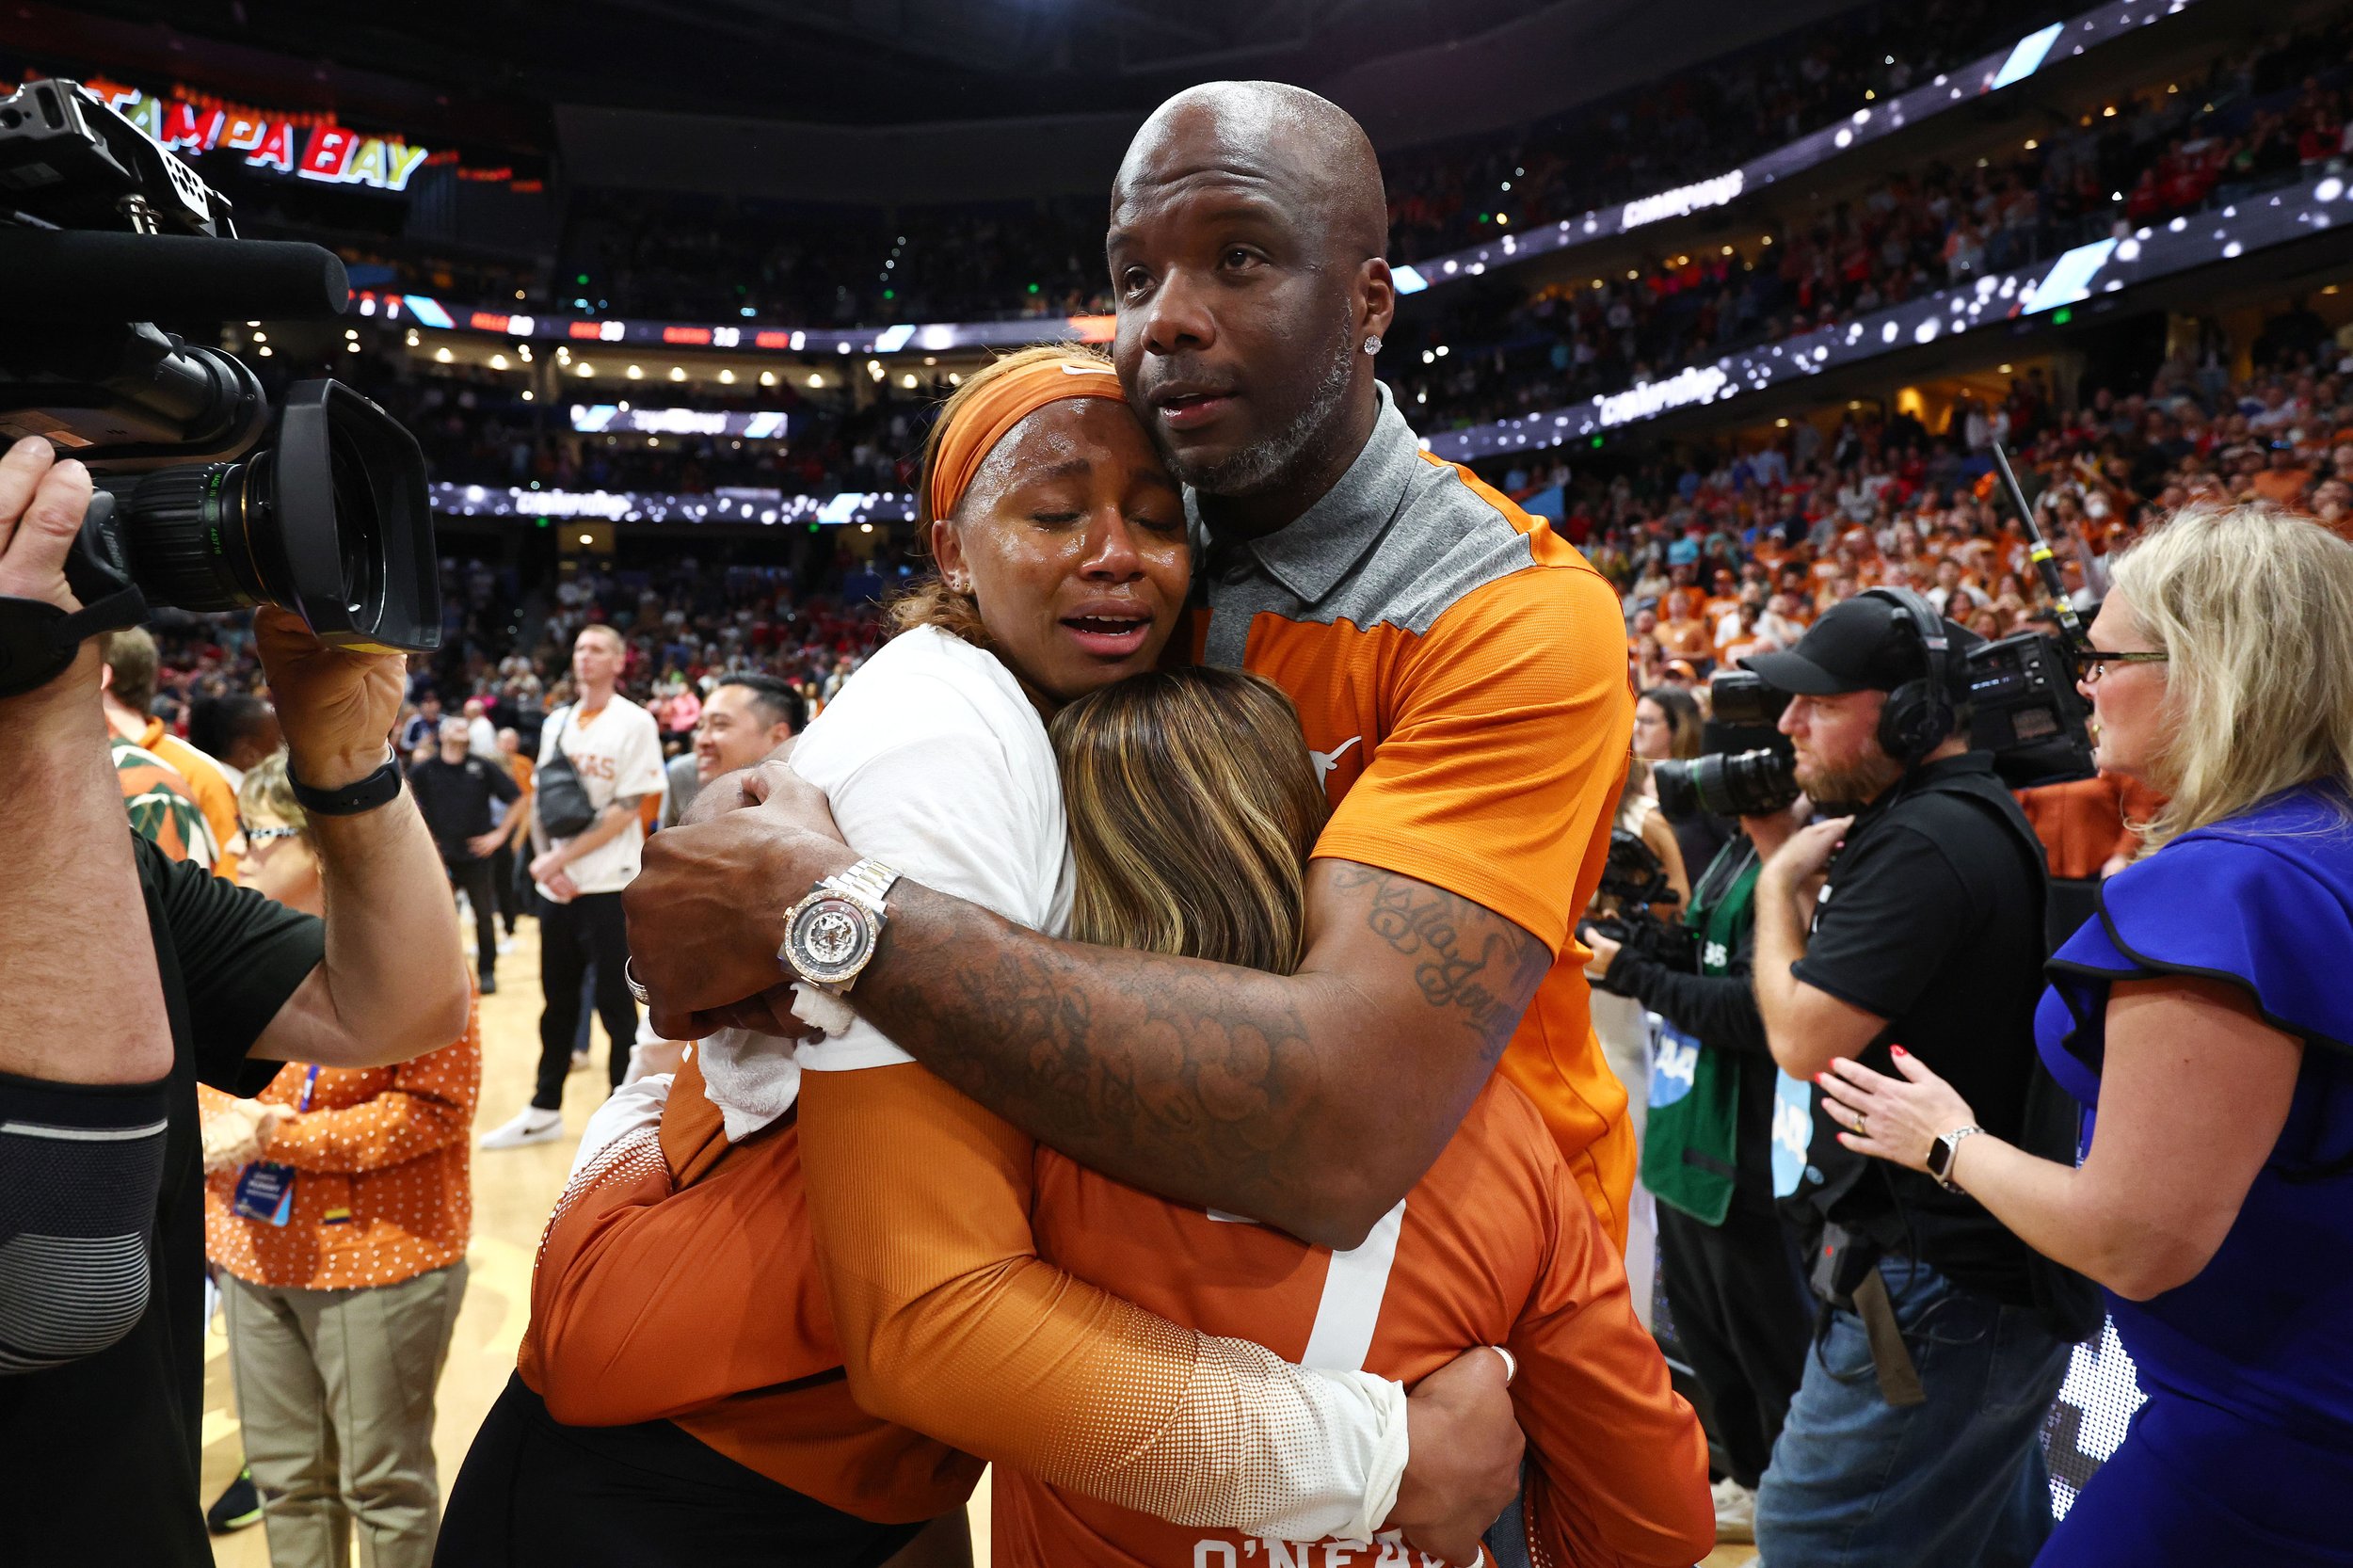  TAMPA, FLORIDA - DECEMBER 17: Asjia O'Neal #7 of the Texas Longhorns celebrates with her father, former NBA player Jermaine O’Neal, after their victory against the Nebraska Cornhuskers during the Division I Women’s Volleyball Championship held at Am